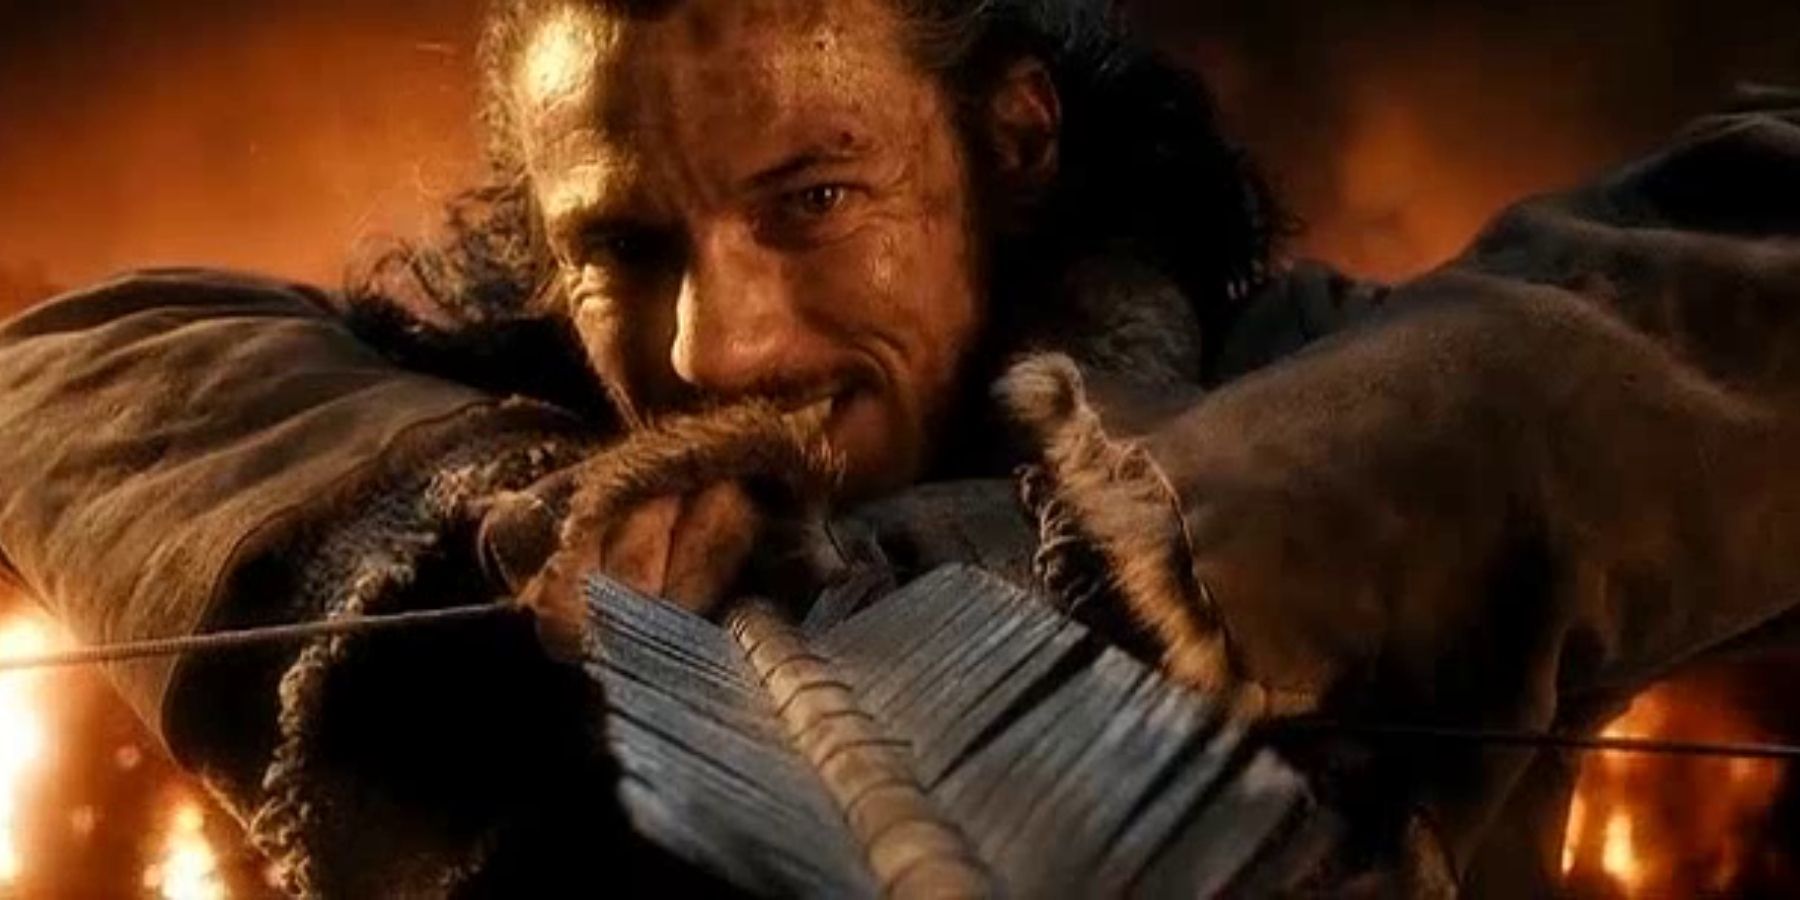 Bard the Bowman fighting Smaug in The Hobbit